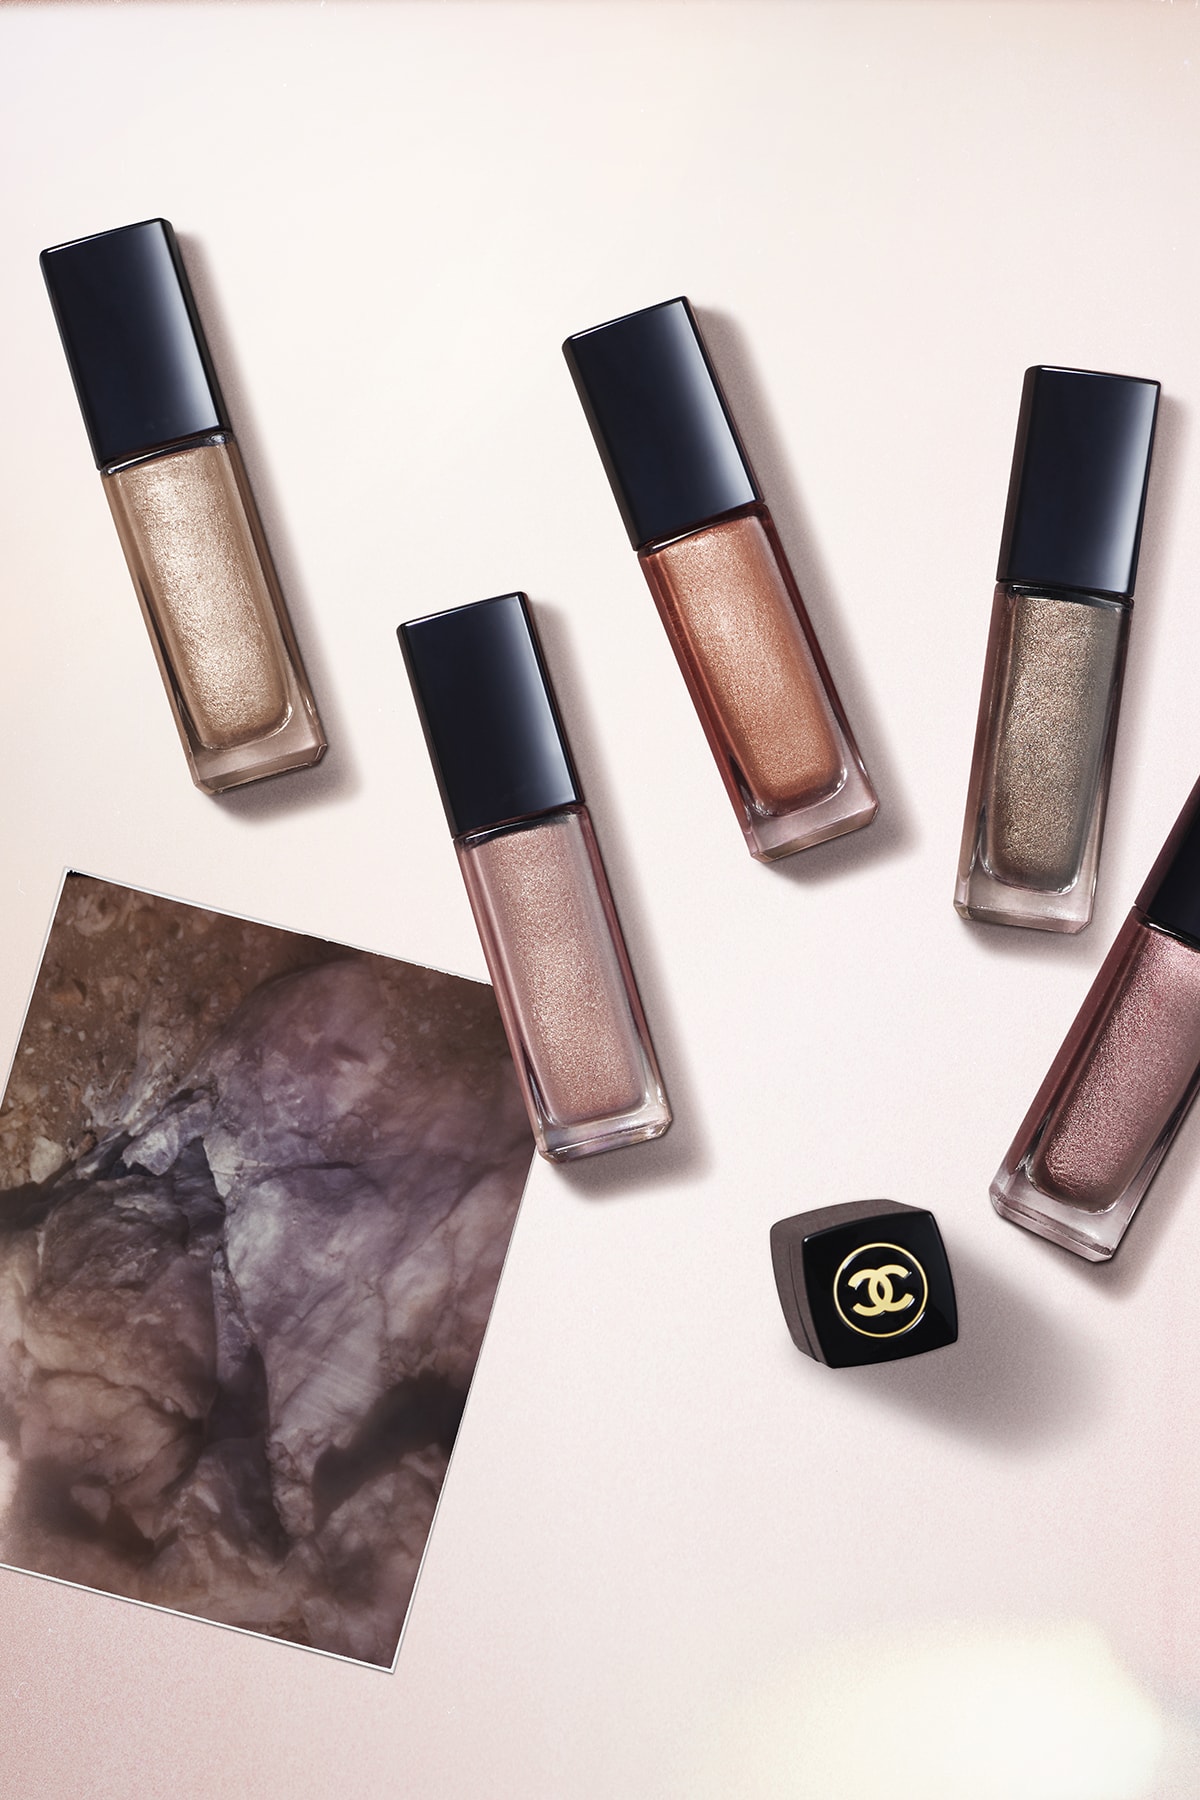 Chanel Introduces Desert Dream Makeup Collection